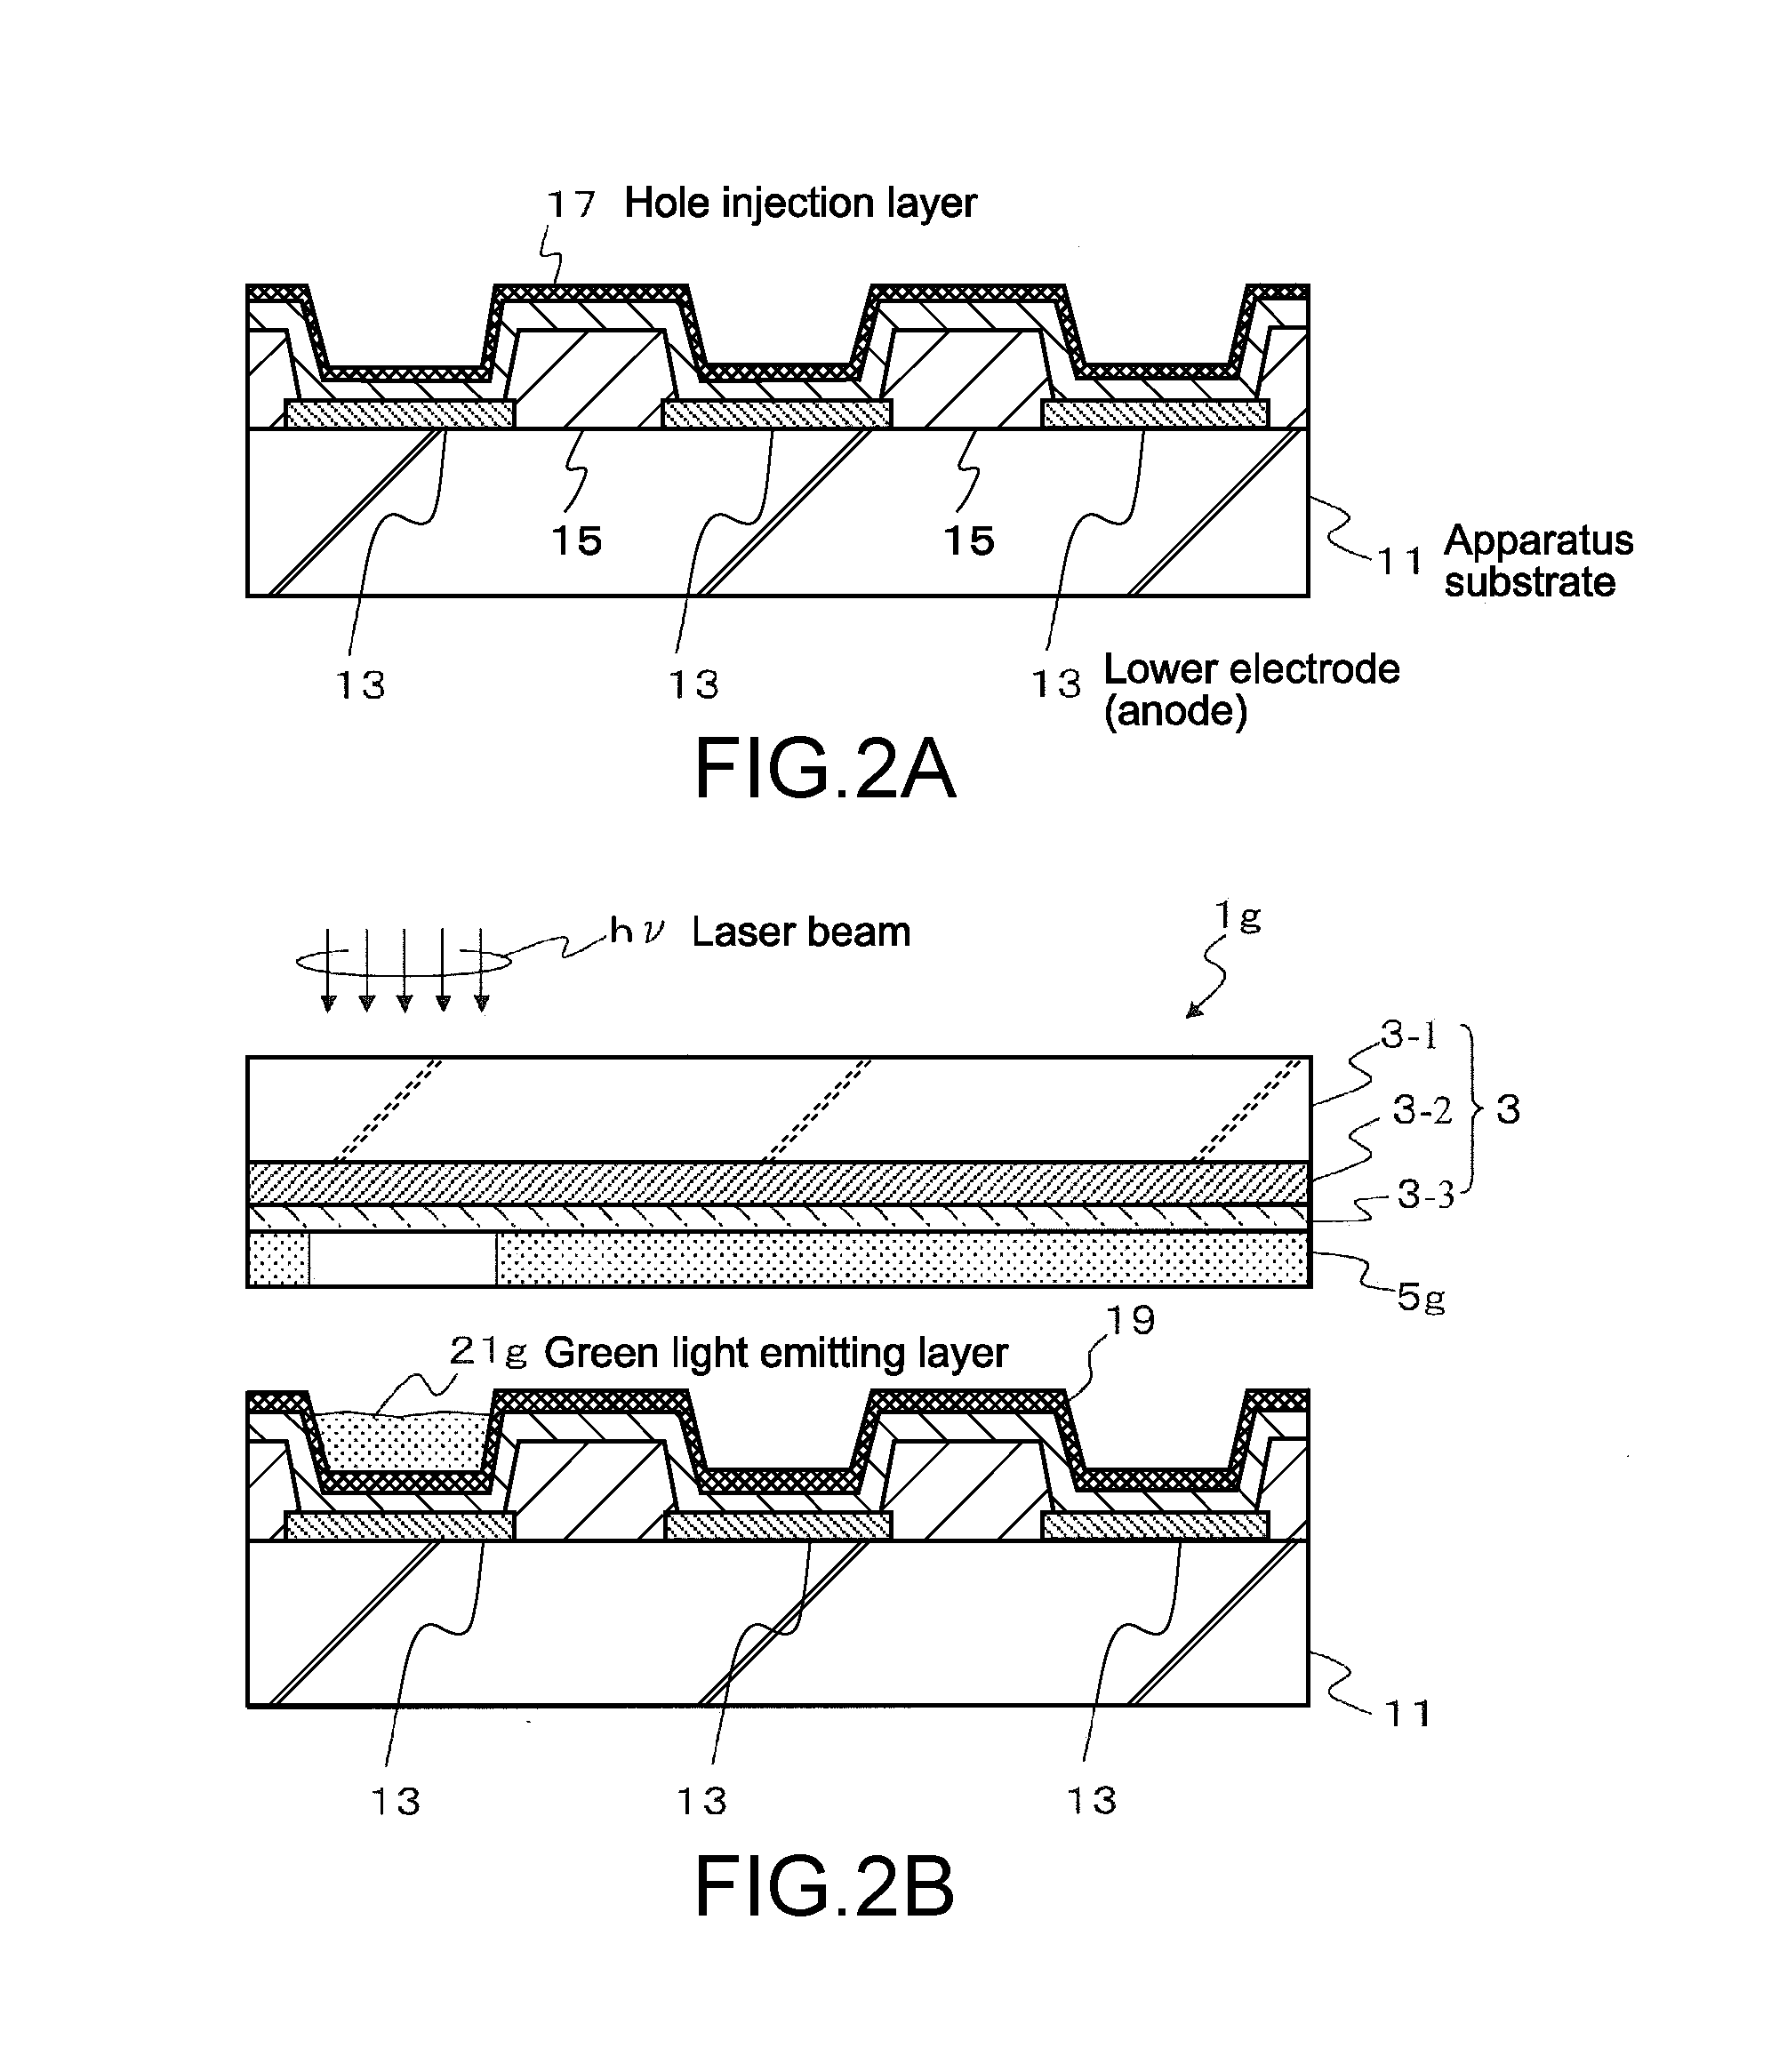 Transfer substrate and method of manufacturing a display apparatus